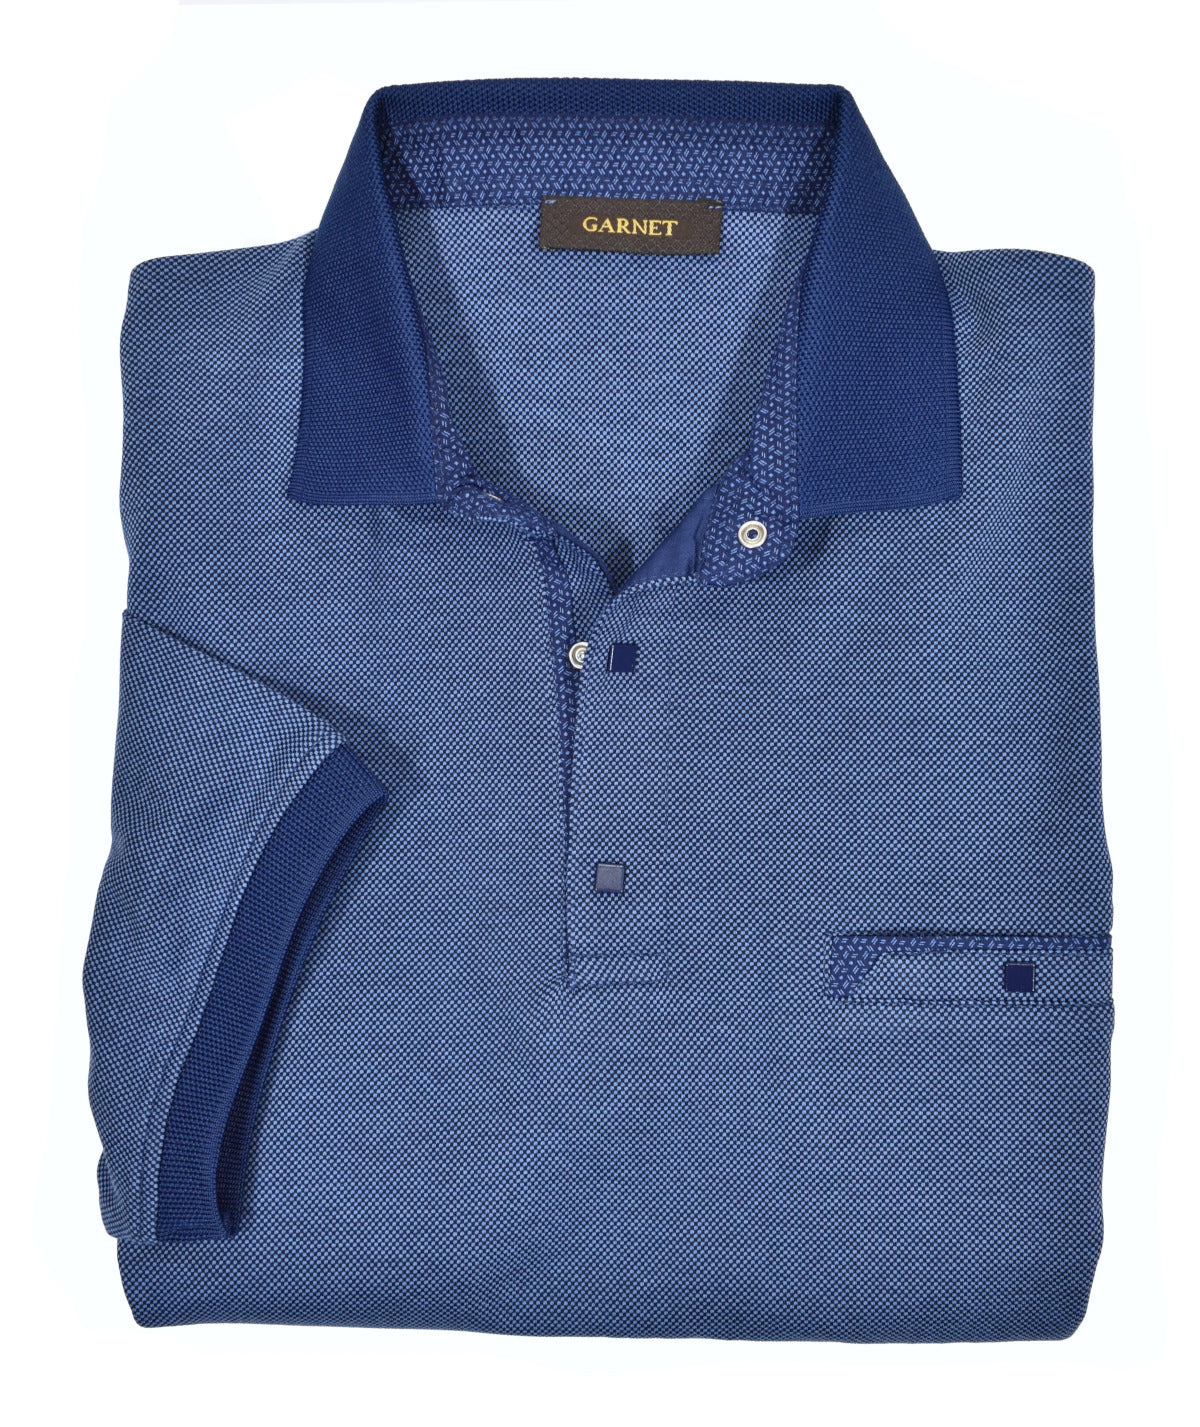 Mercerized cotton is extra fine, feels great and looks expensively elegant.  The extra fine dot pattern coupled with a snap closure, fashion collar, trim fabric, and trend pocket make this polo special. A must have for this season.  Classic shaped fit.   Colors: Blue, Tan  Modern fit.